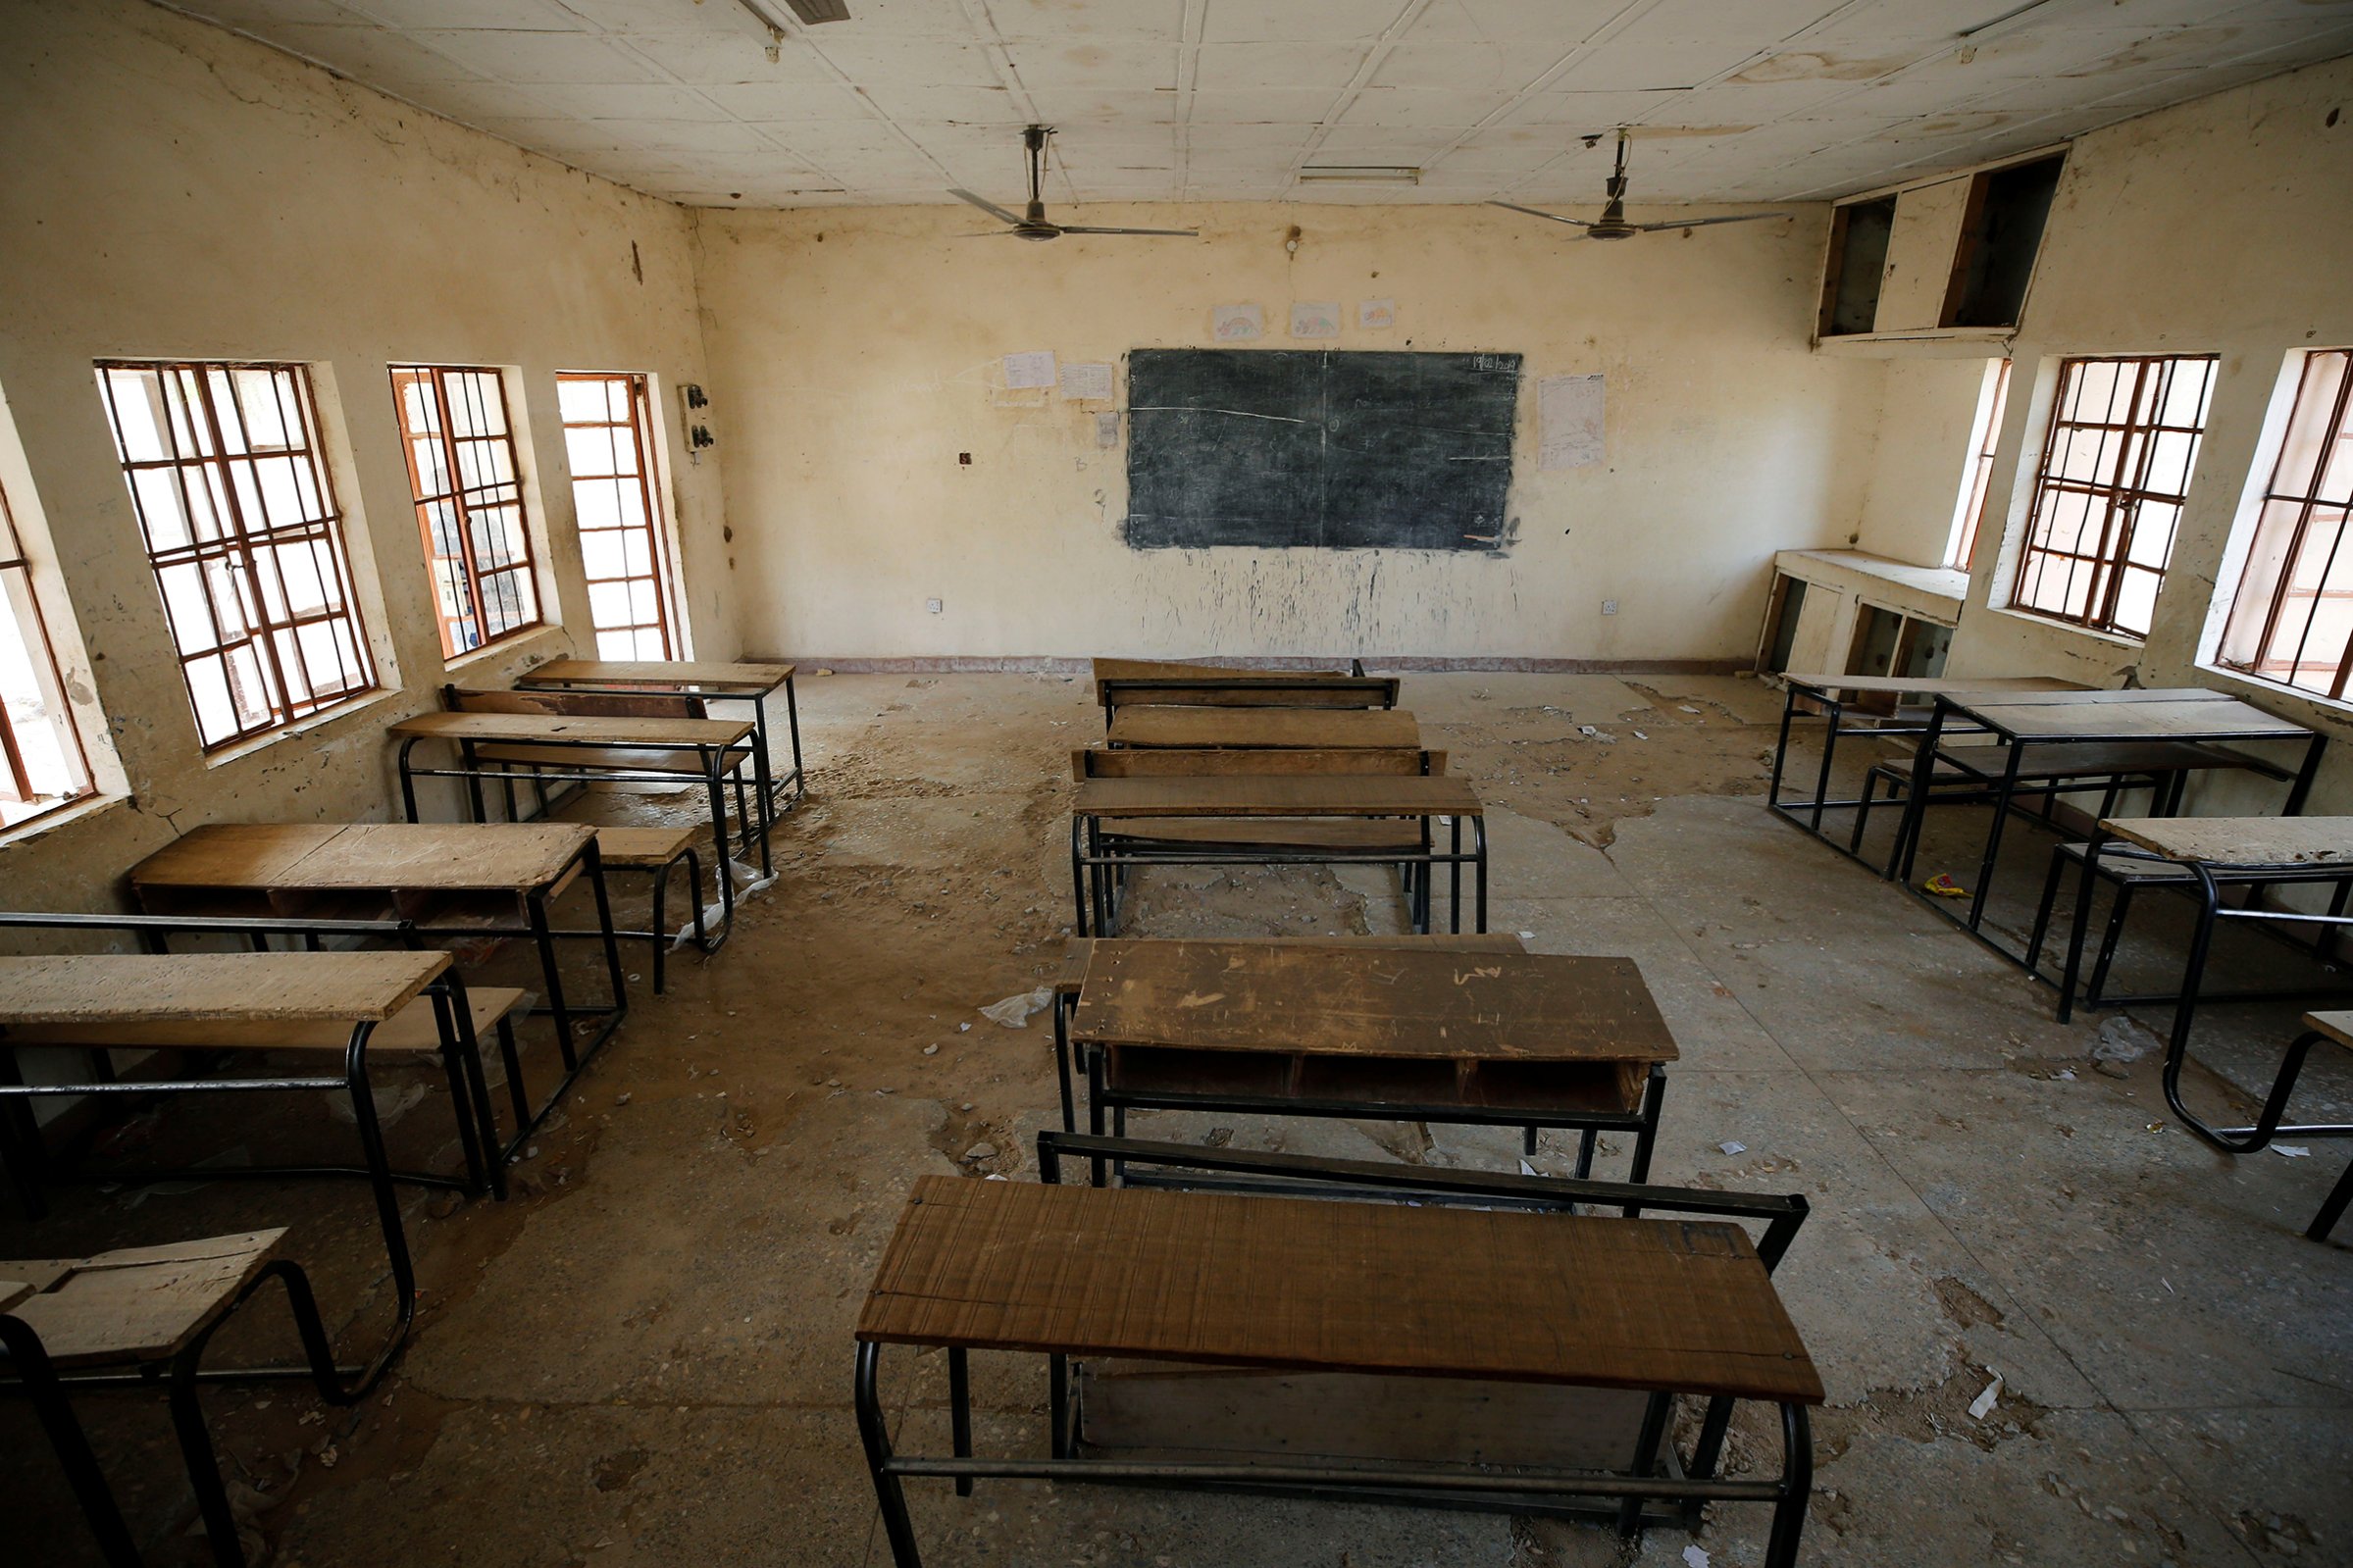 A view shows an empty classroom at the school in Dapchi in the northeastern state of Yobe, where dozens of school girls went missing after an attack on the village by Boko Haram